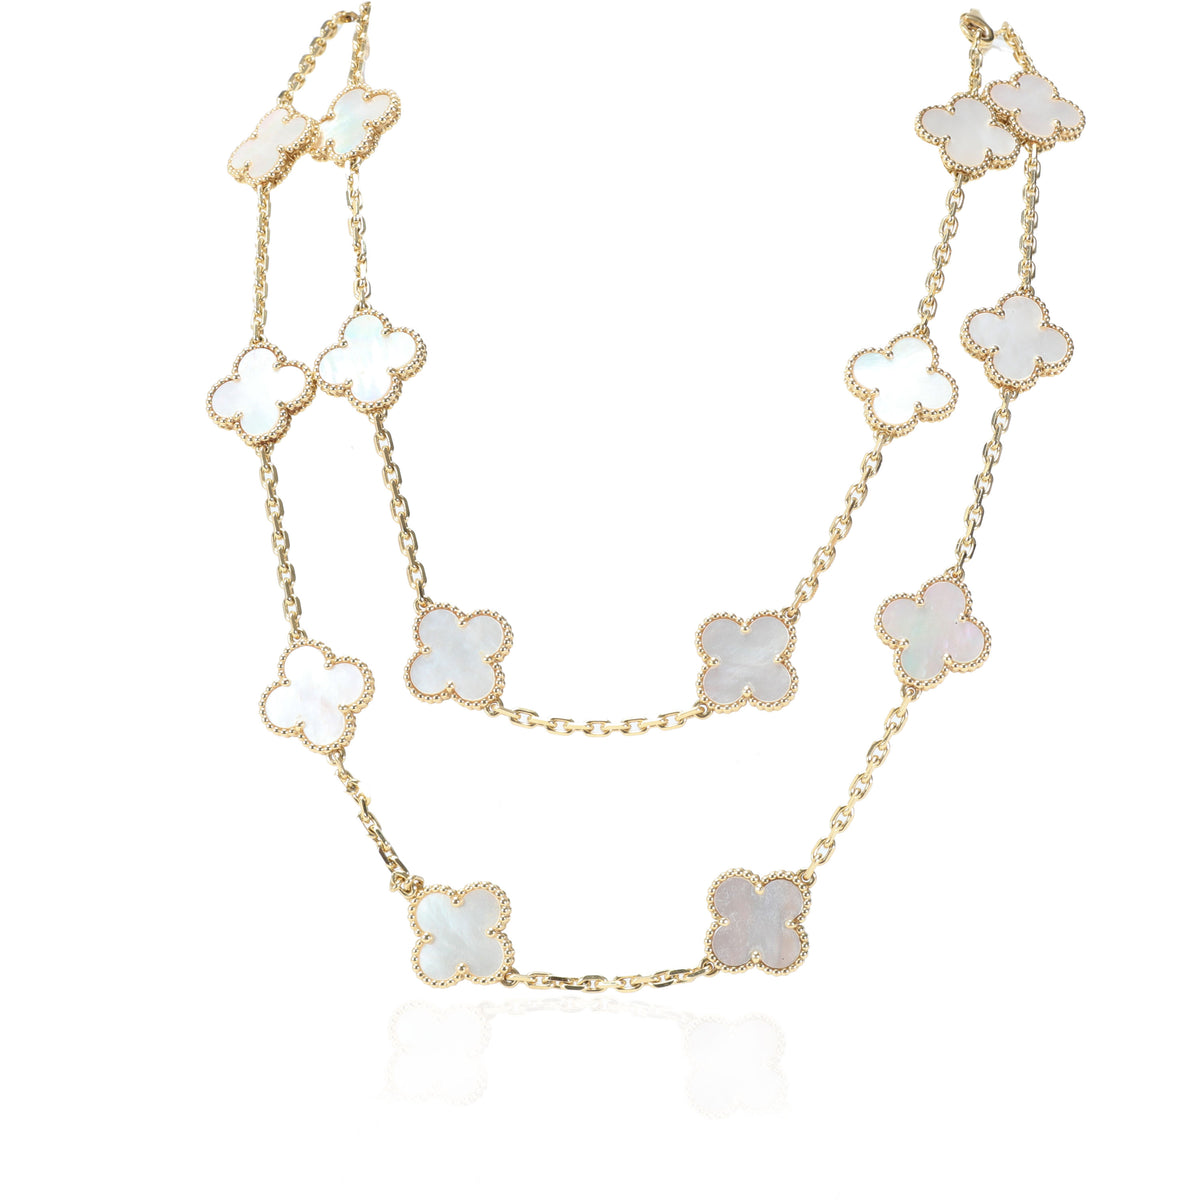 Van Cleef & Arpels Alhambra Mother Of Pearl Fashion Necklace in 18k Yellow Gold